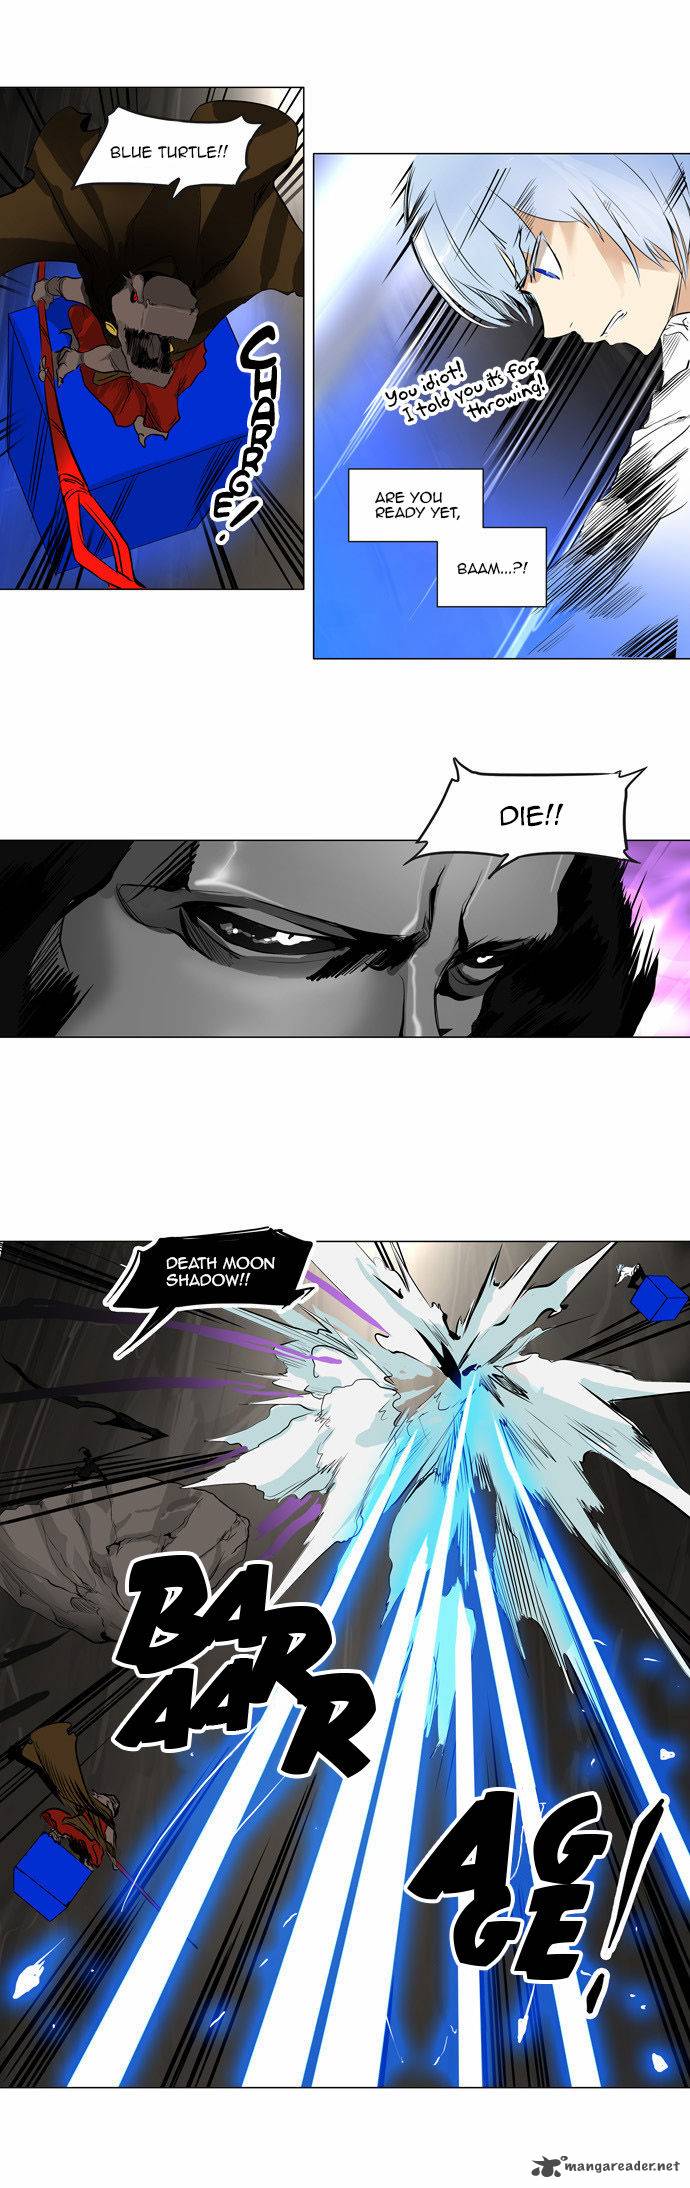 Tower Of God 103 6